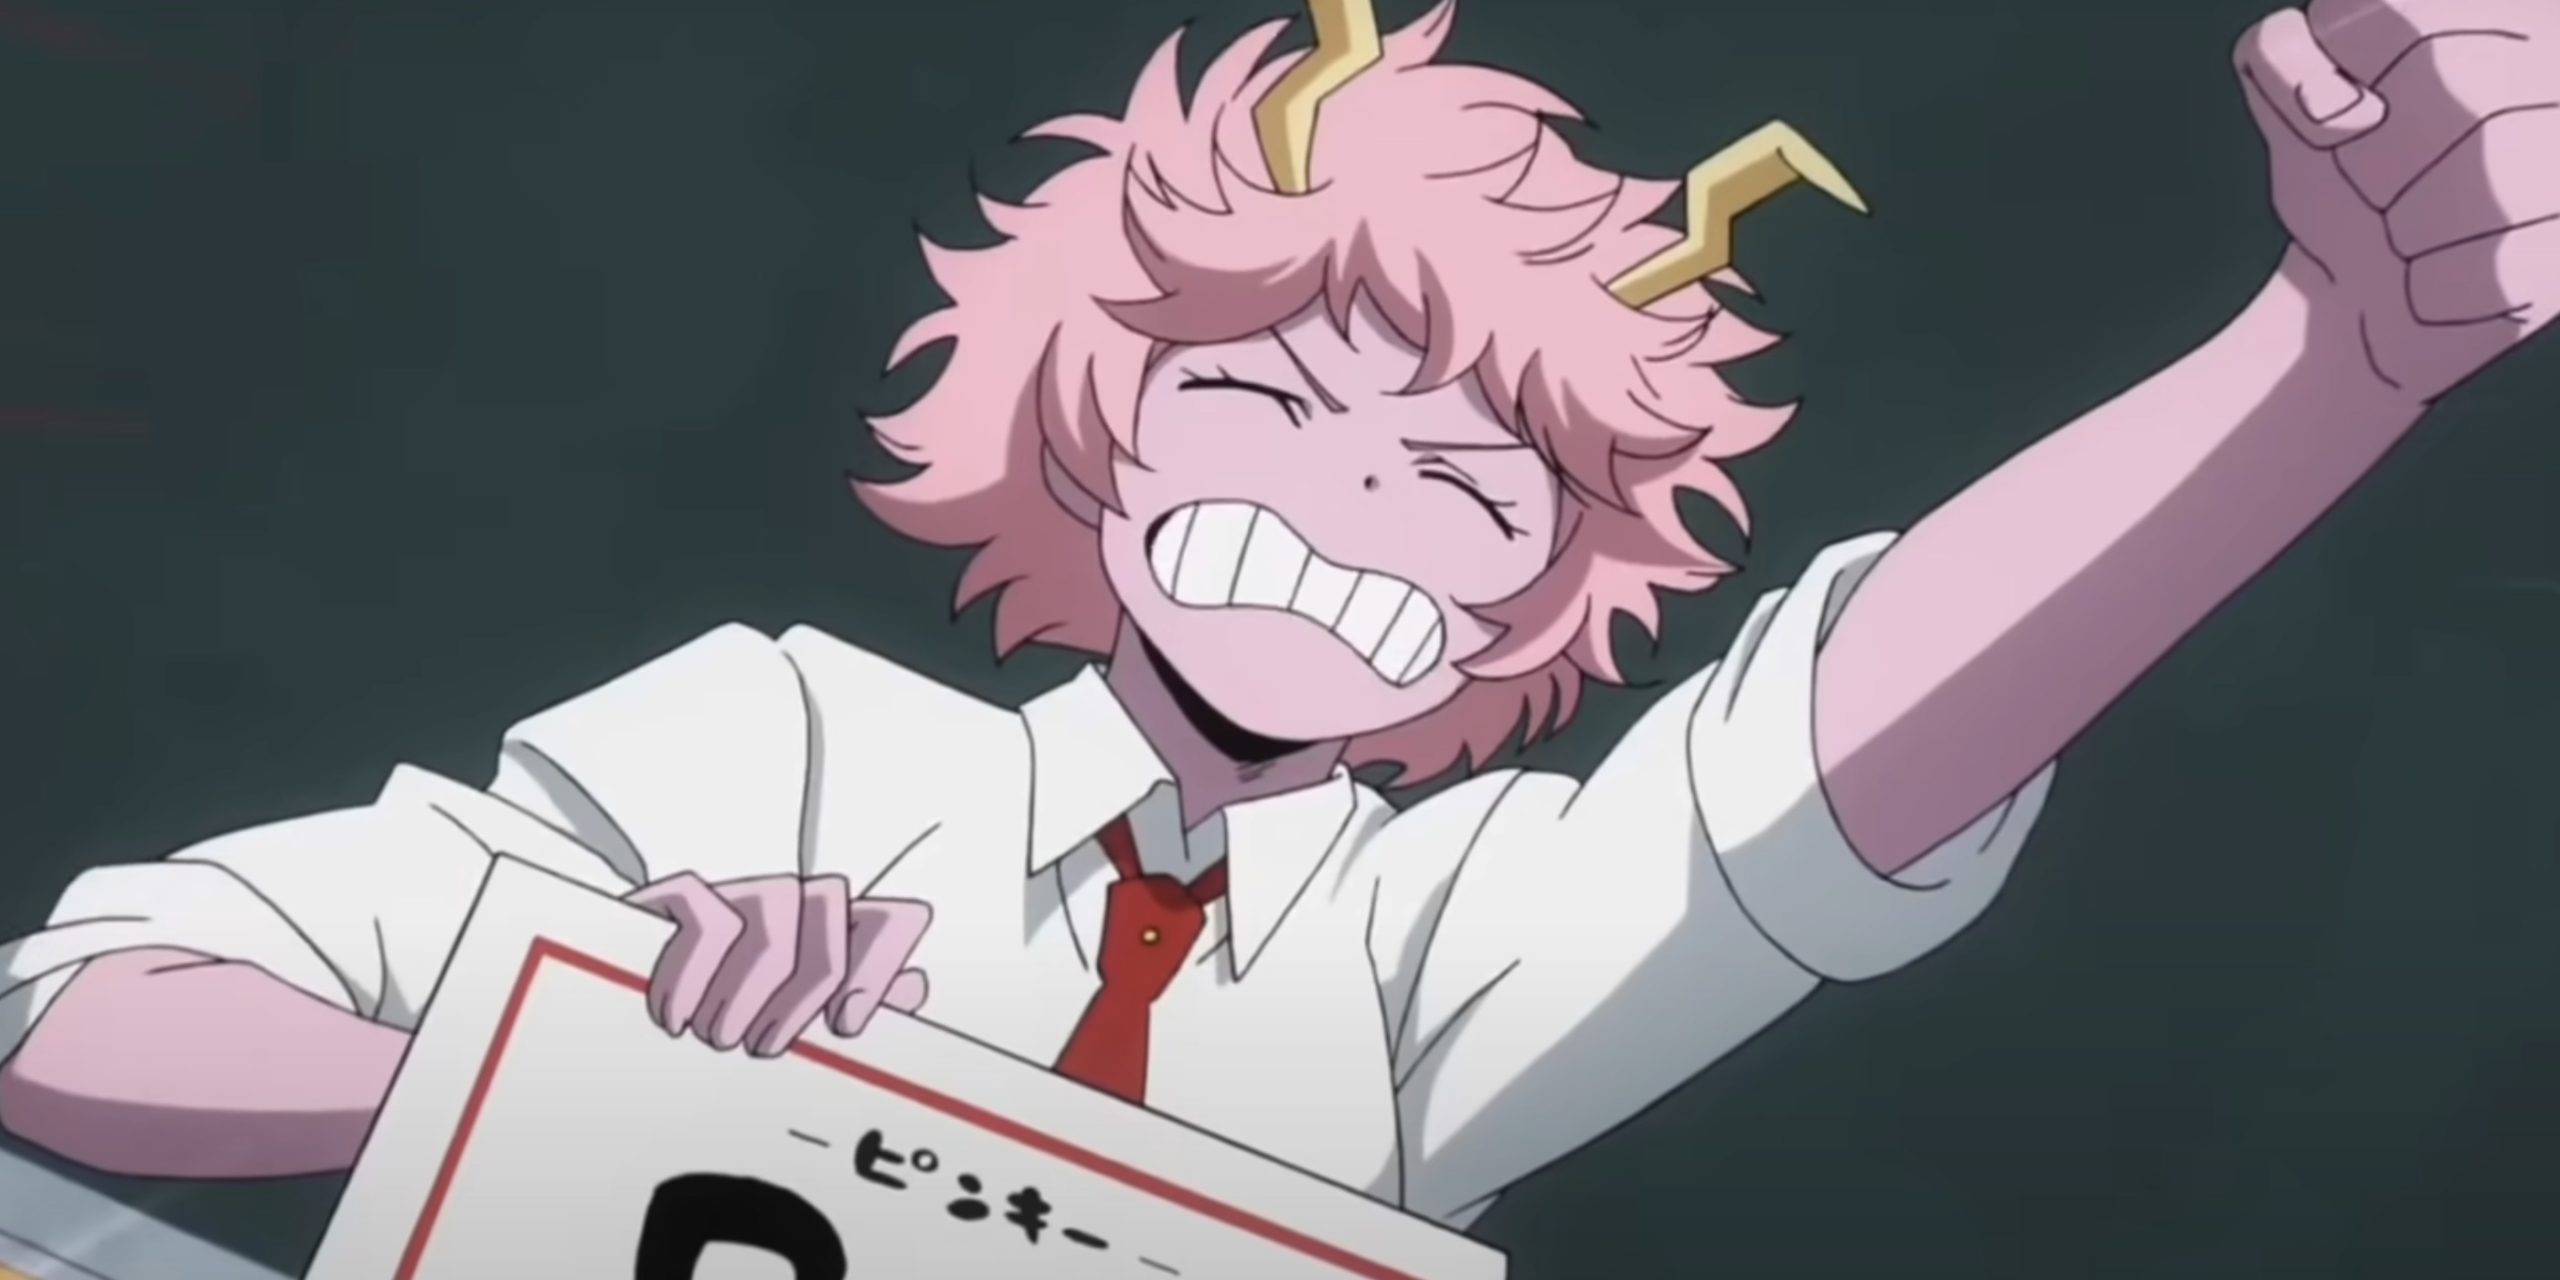 1705596722 284 The Real Reason Why Mina Ashidos Skin Is Pink In